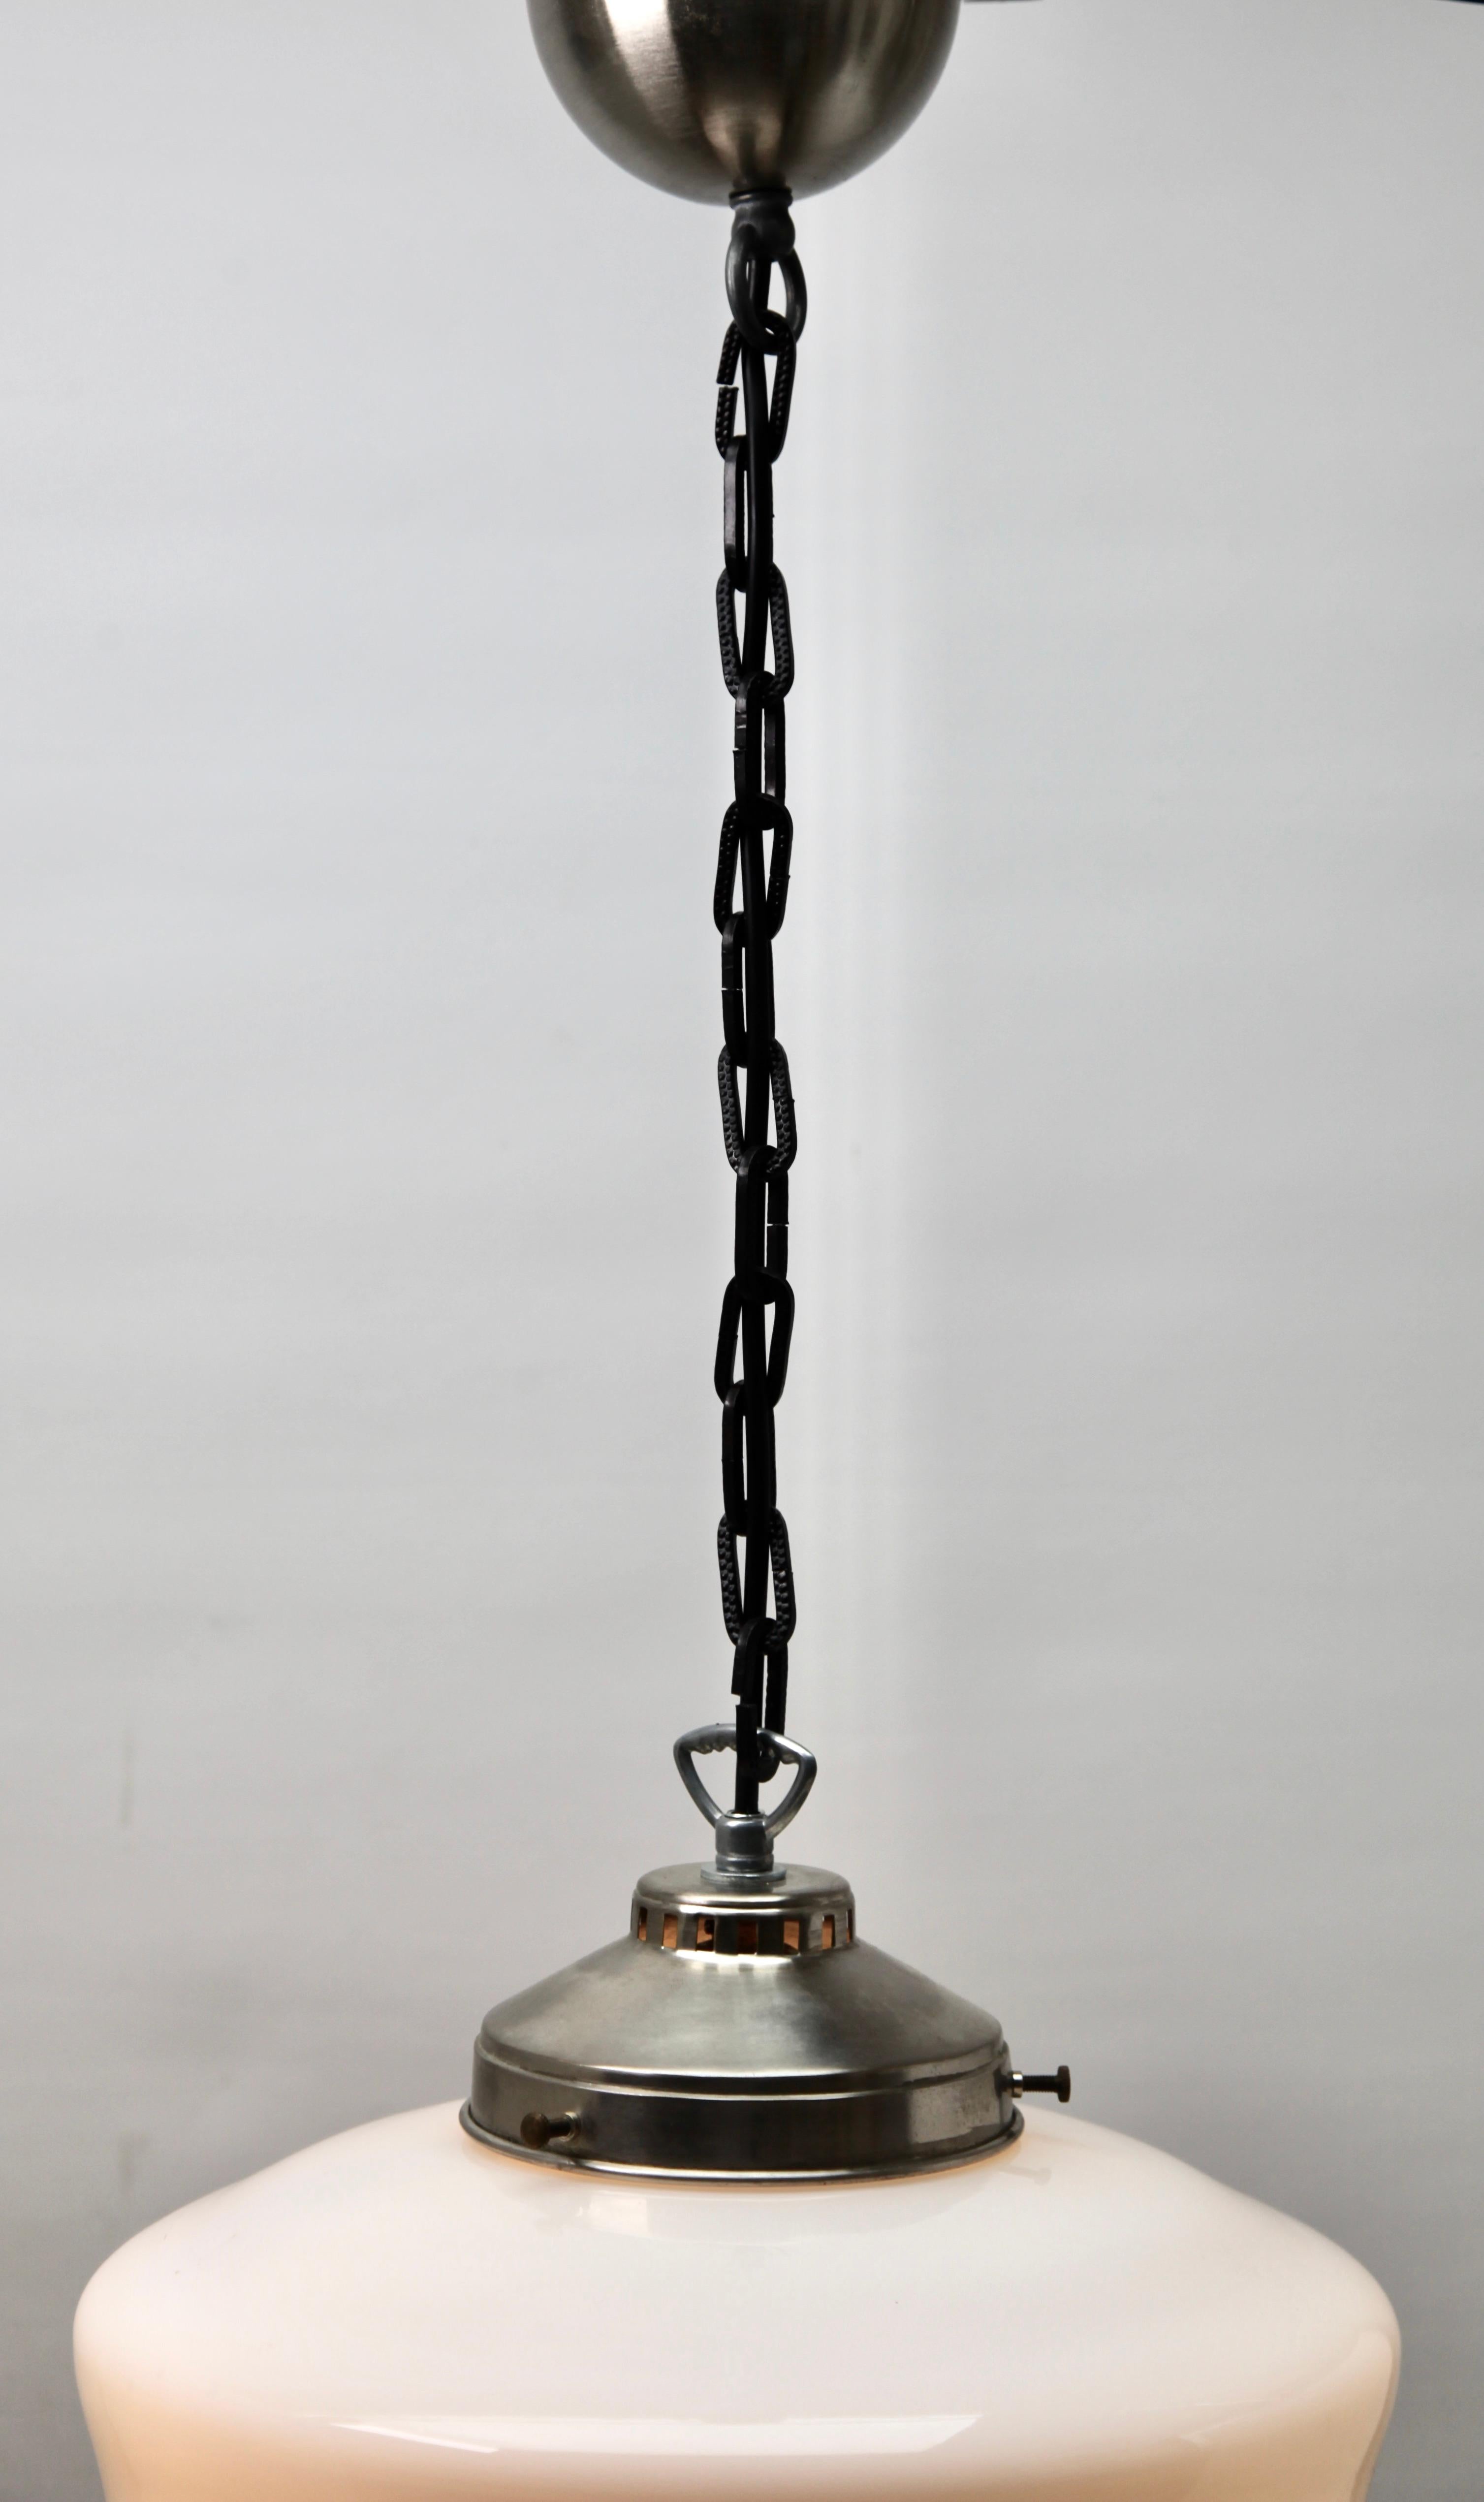 Mid-20th Century Pendant Lamp with a Opaline Shade, 1930s, Netherlands For Sale